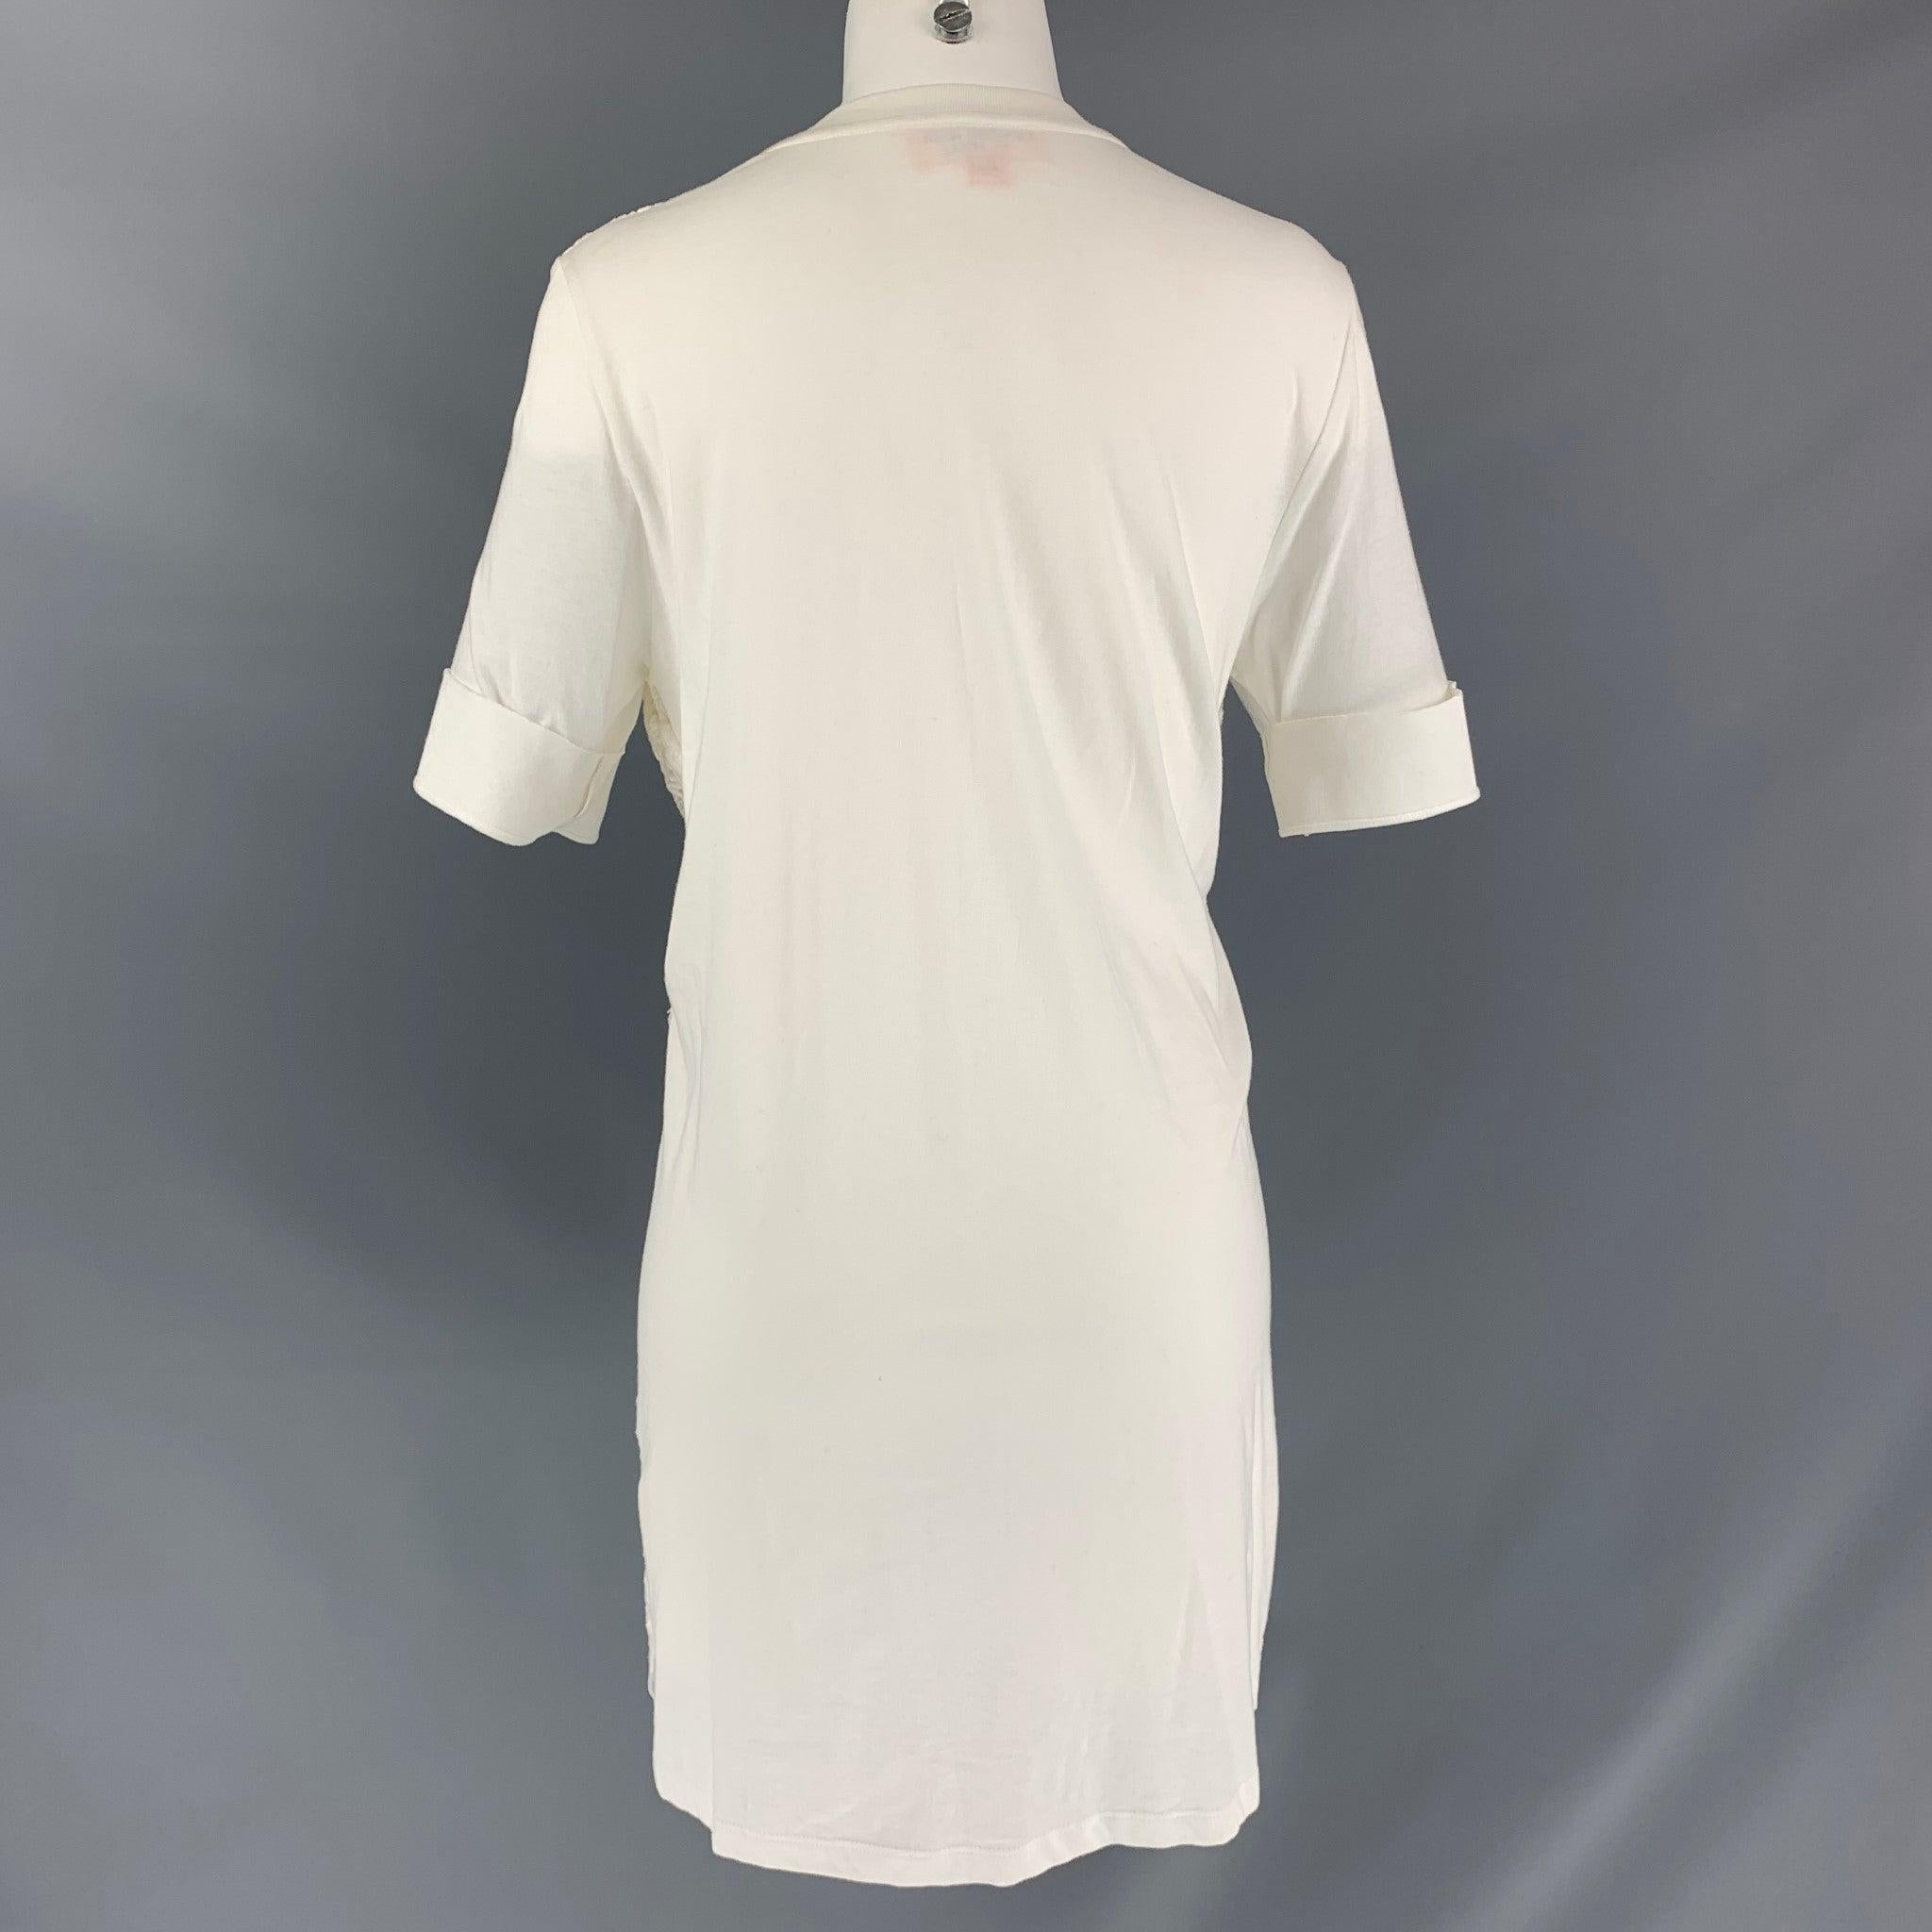 GIAMBATTISTA VALLI Size M White Cotton Lace Short Sleeve Dress In Good Condition For Sale In San Francisco, CA